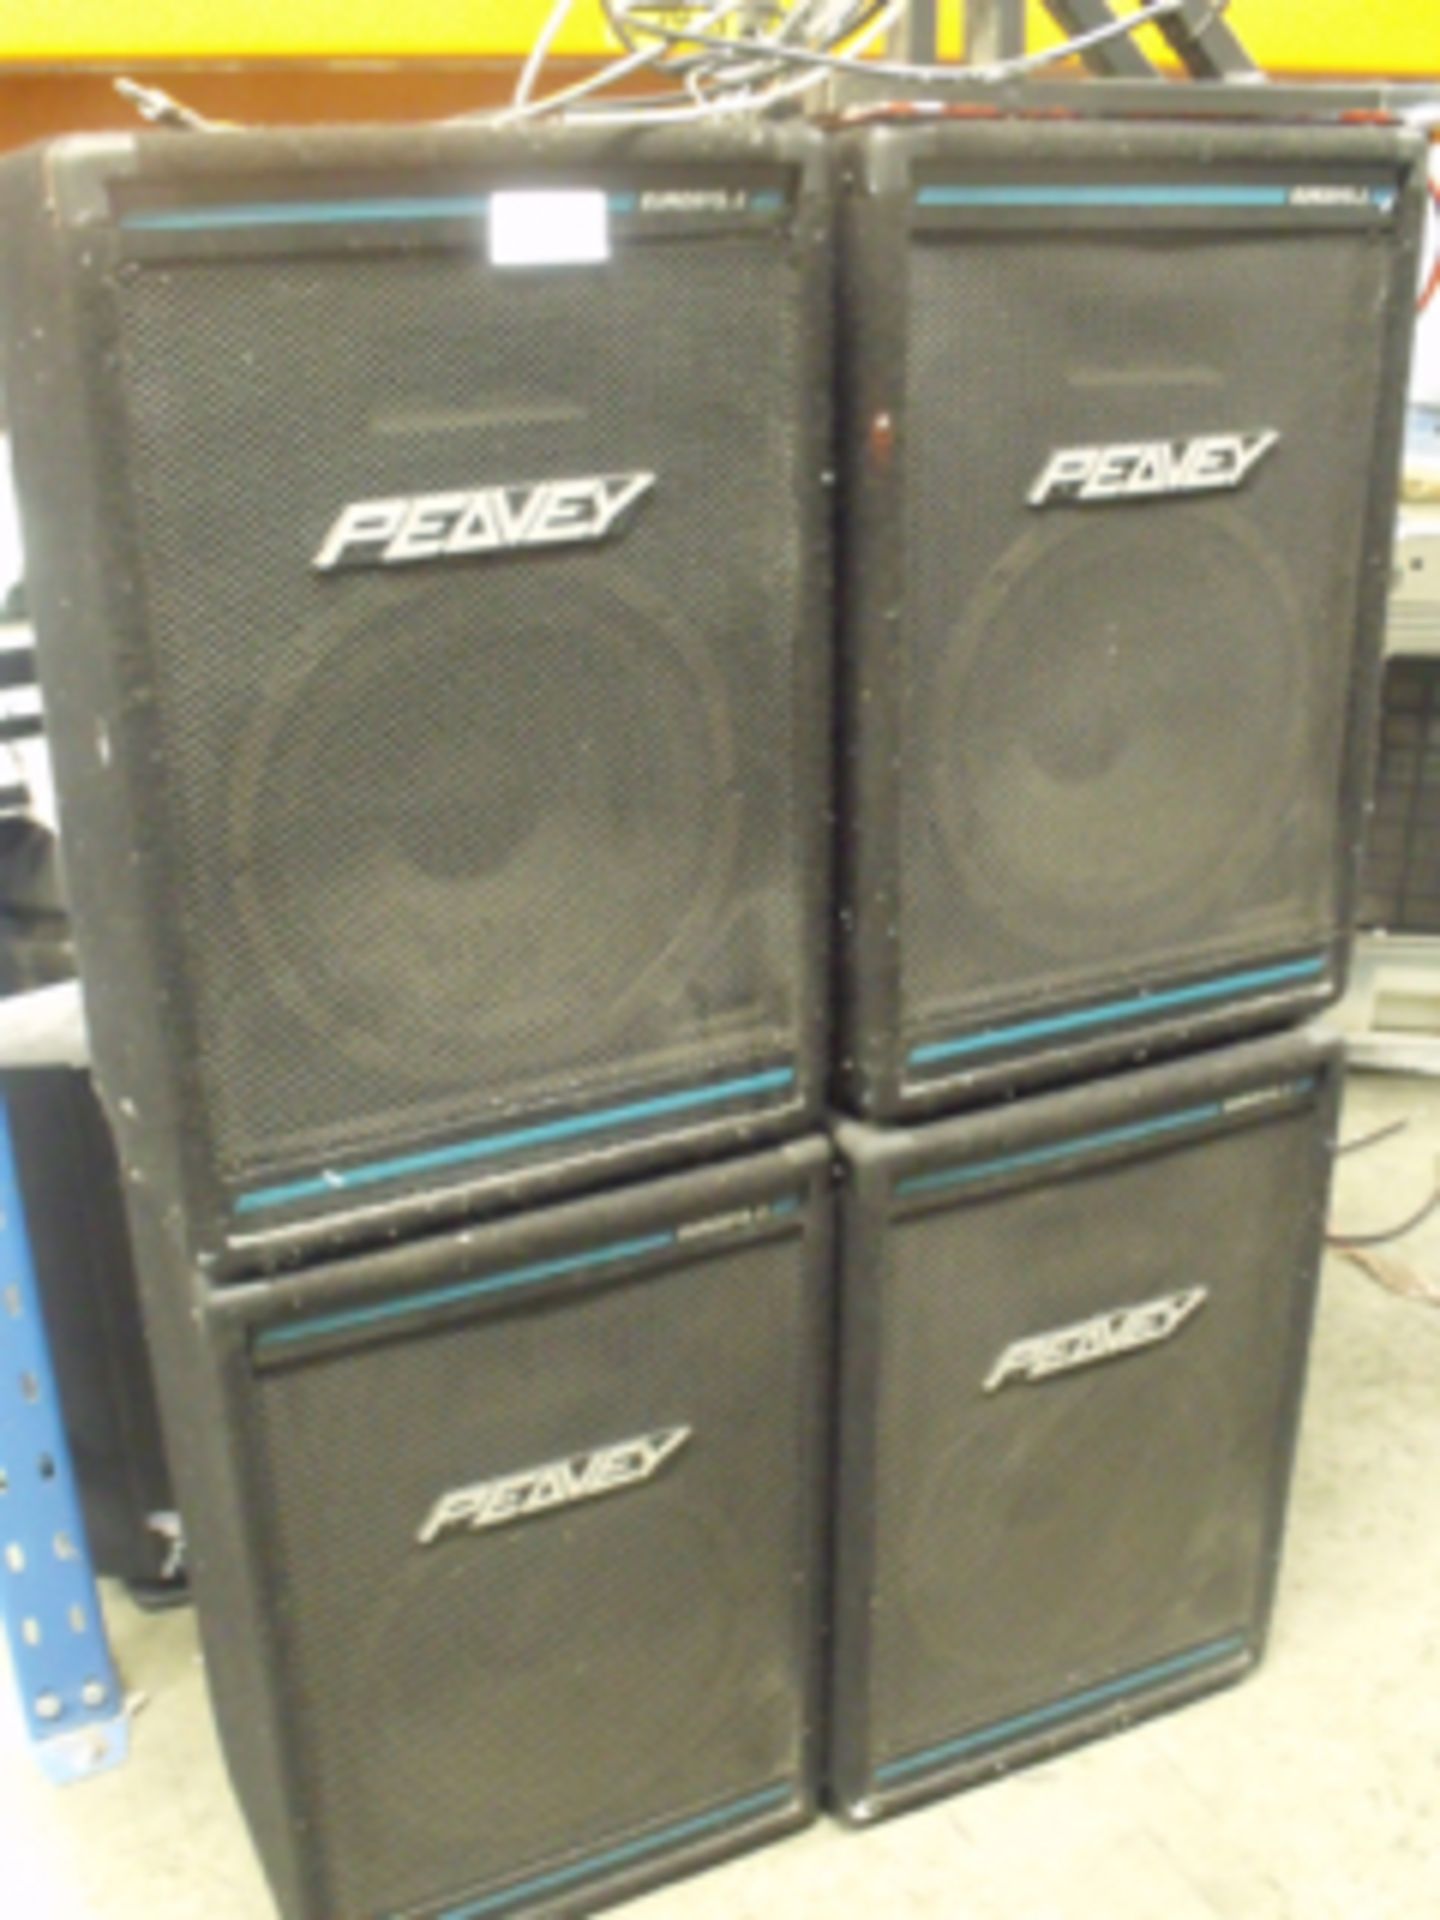 4 x Peavey Speakers , 2 with wall brackets